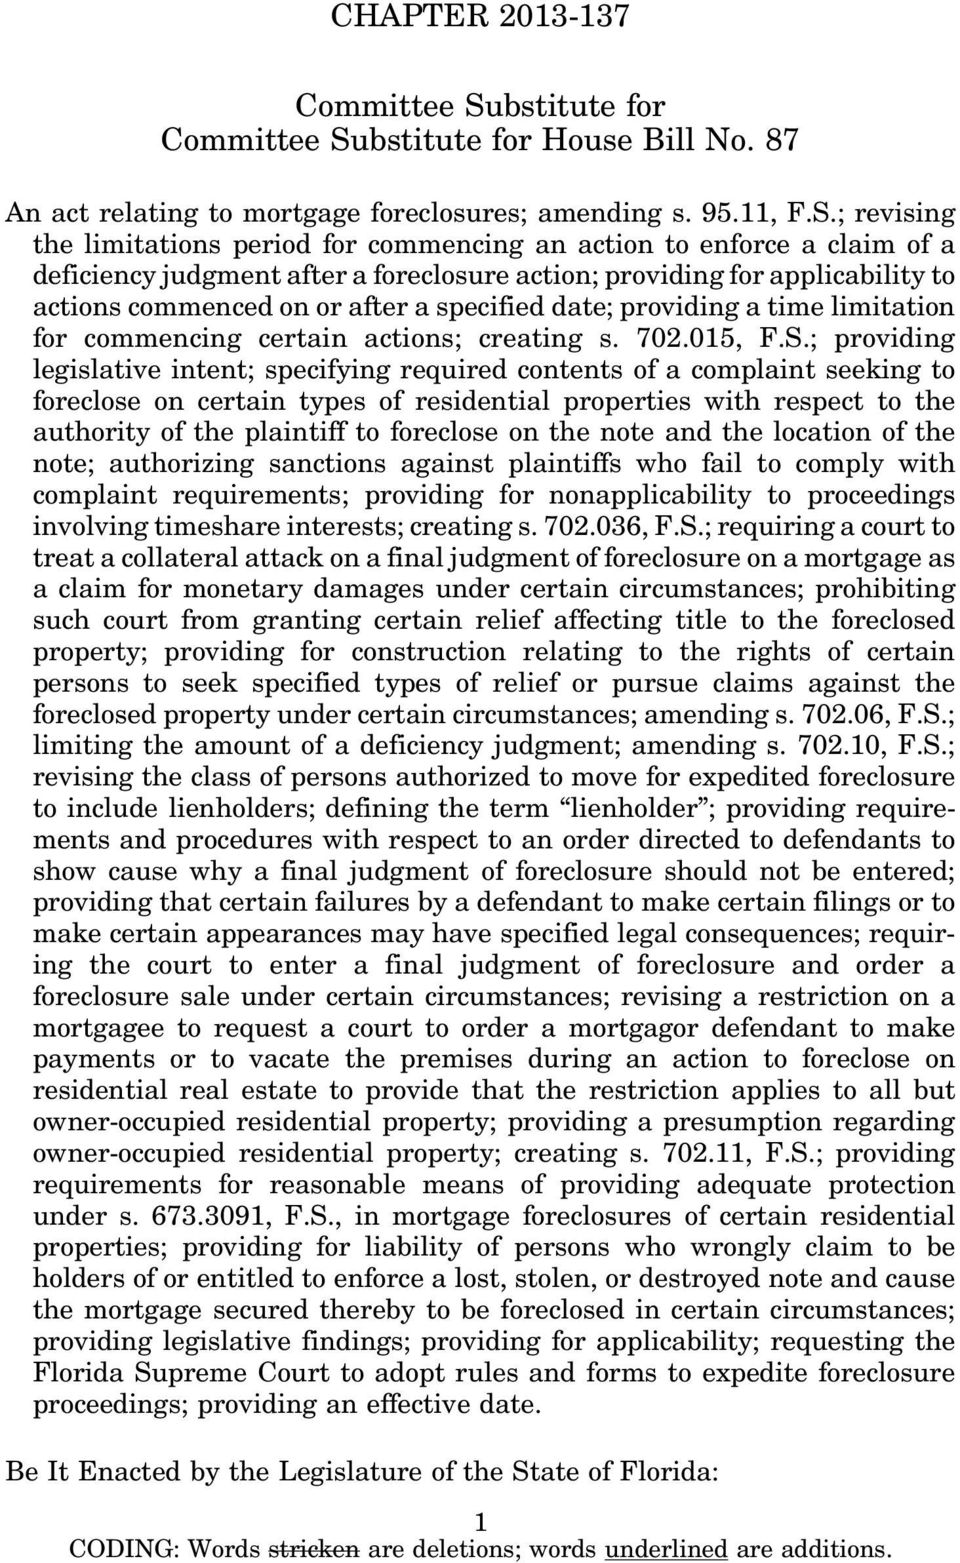 bstitute for House Bill No. 87 An act relating to mortgage foreclosures; amending s. 95.11, F.S.